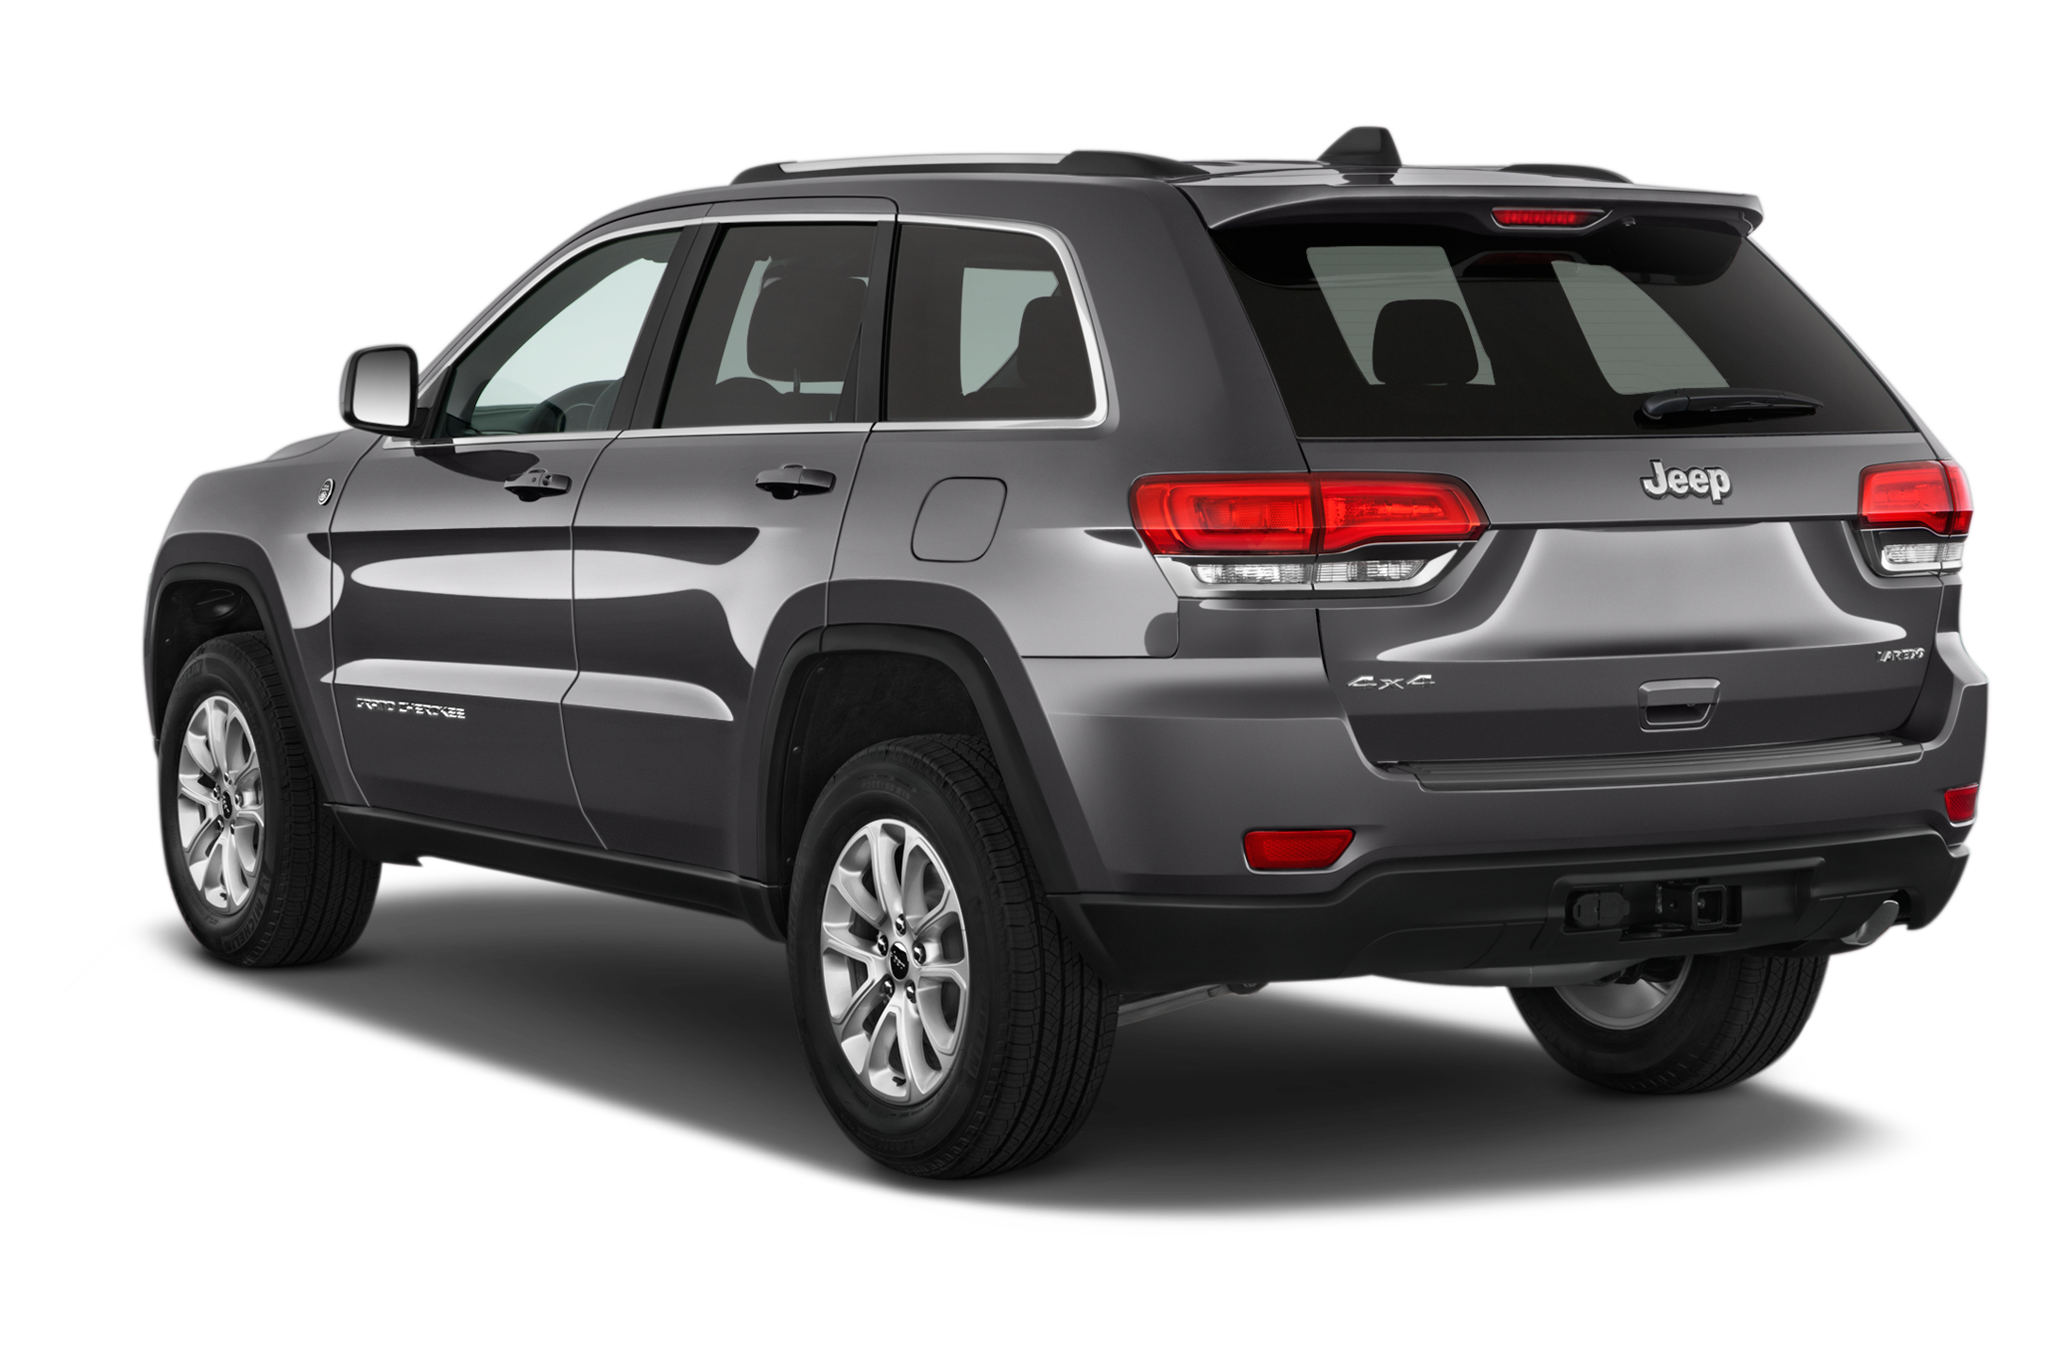 Jeep Grand Cherokee Overland 4wd 2014 International Price And Overview